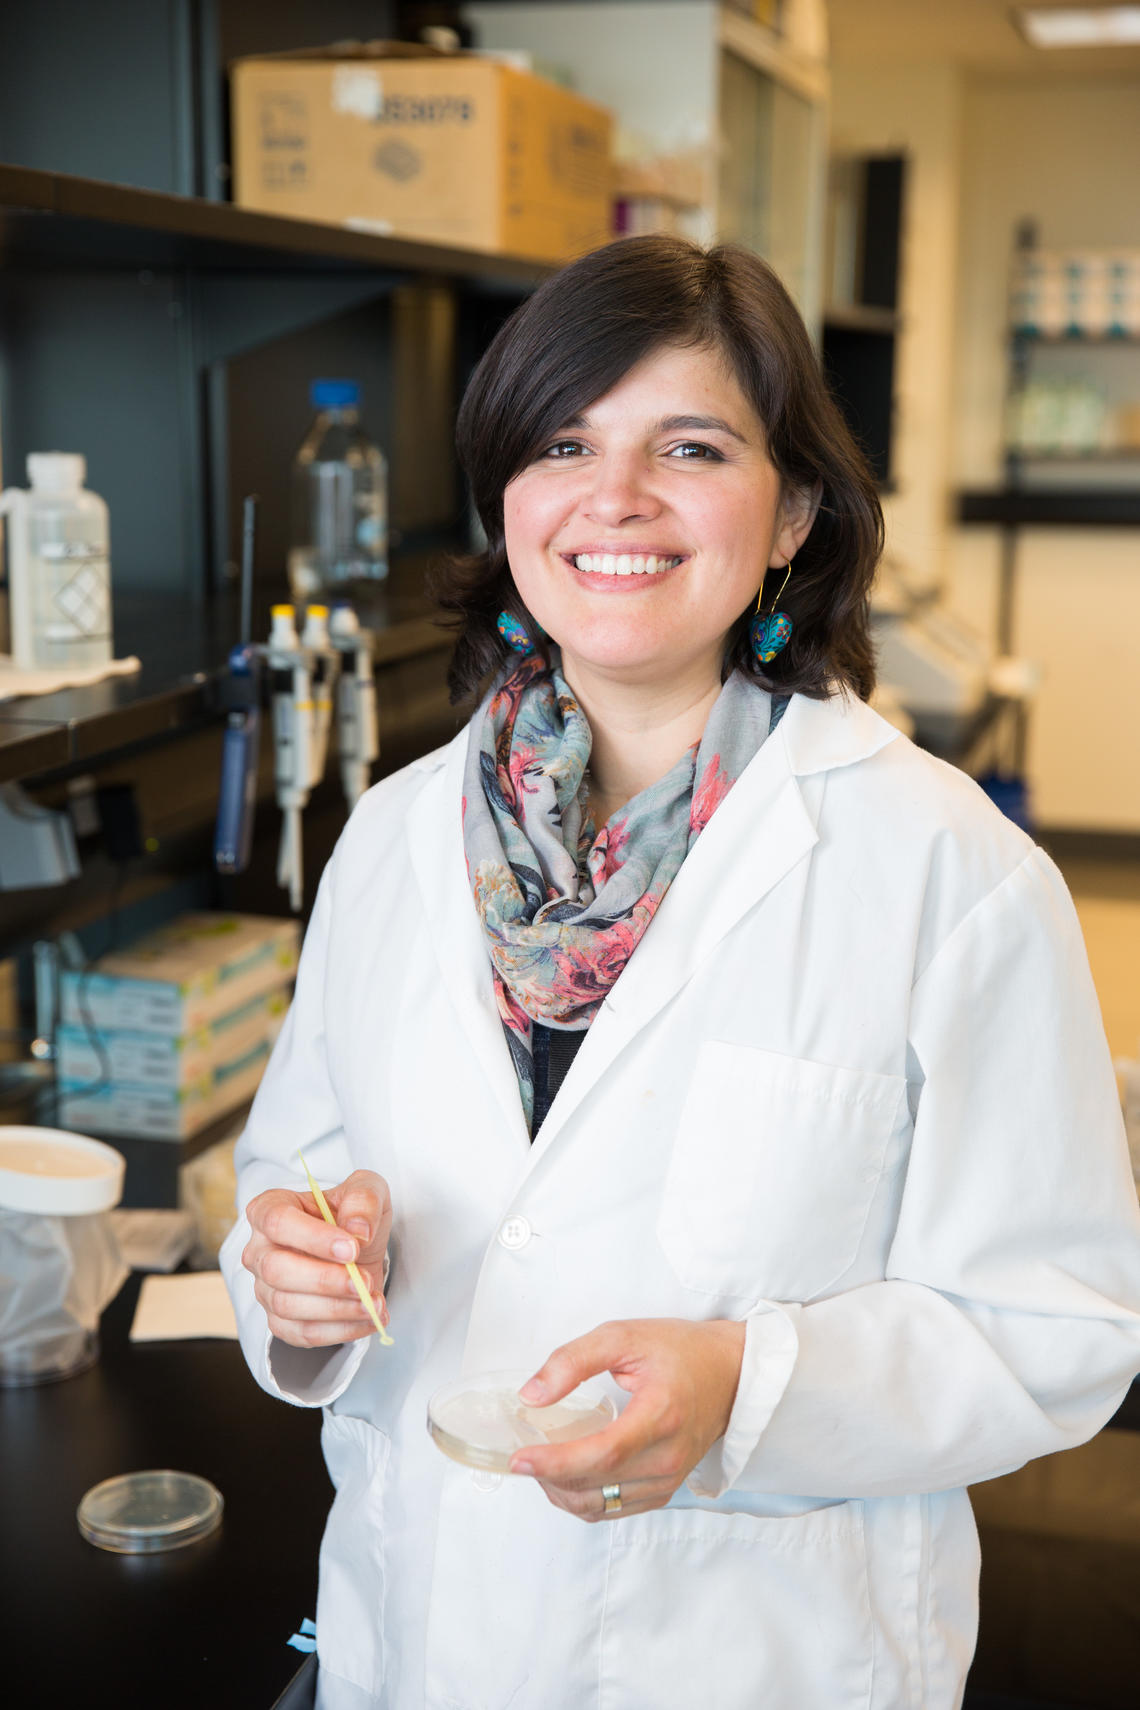 Dr. Marie Claire Arrieta, PhD, (above) Dr. Jumana Samara, MD, and their team developed the Probiotics for extremely low birth weight infants study